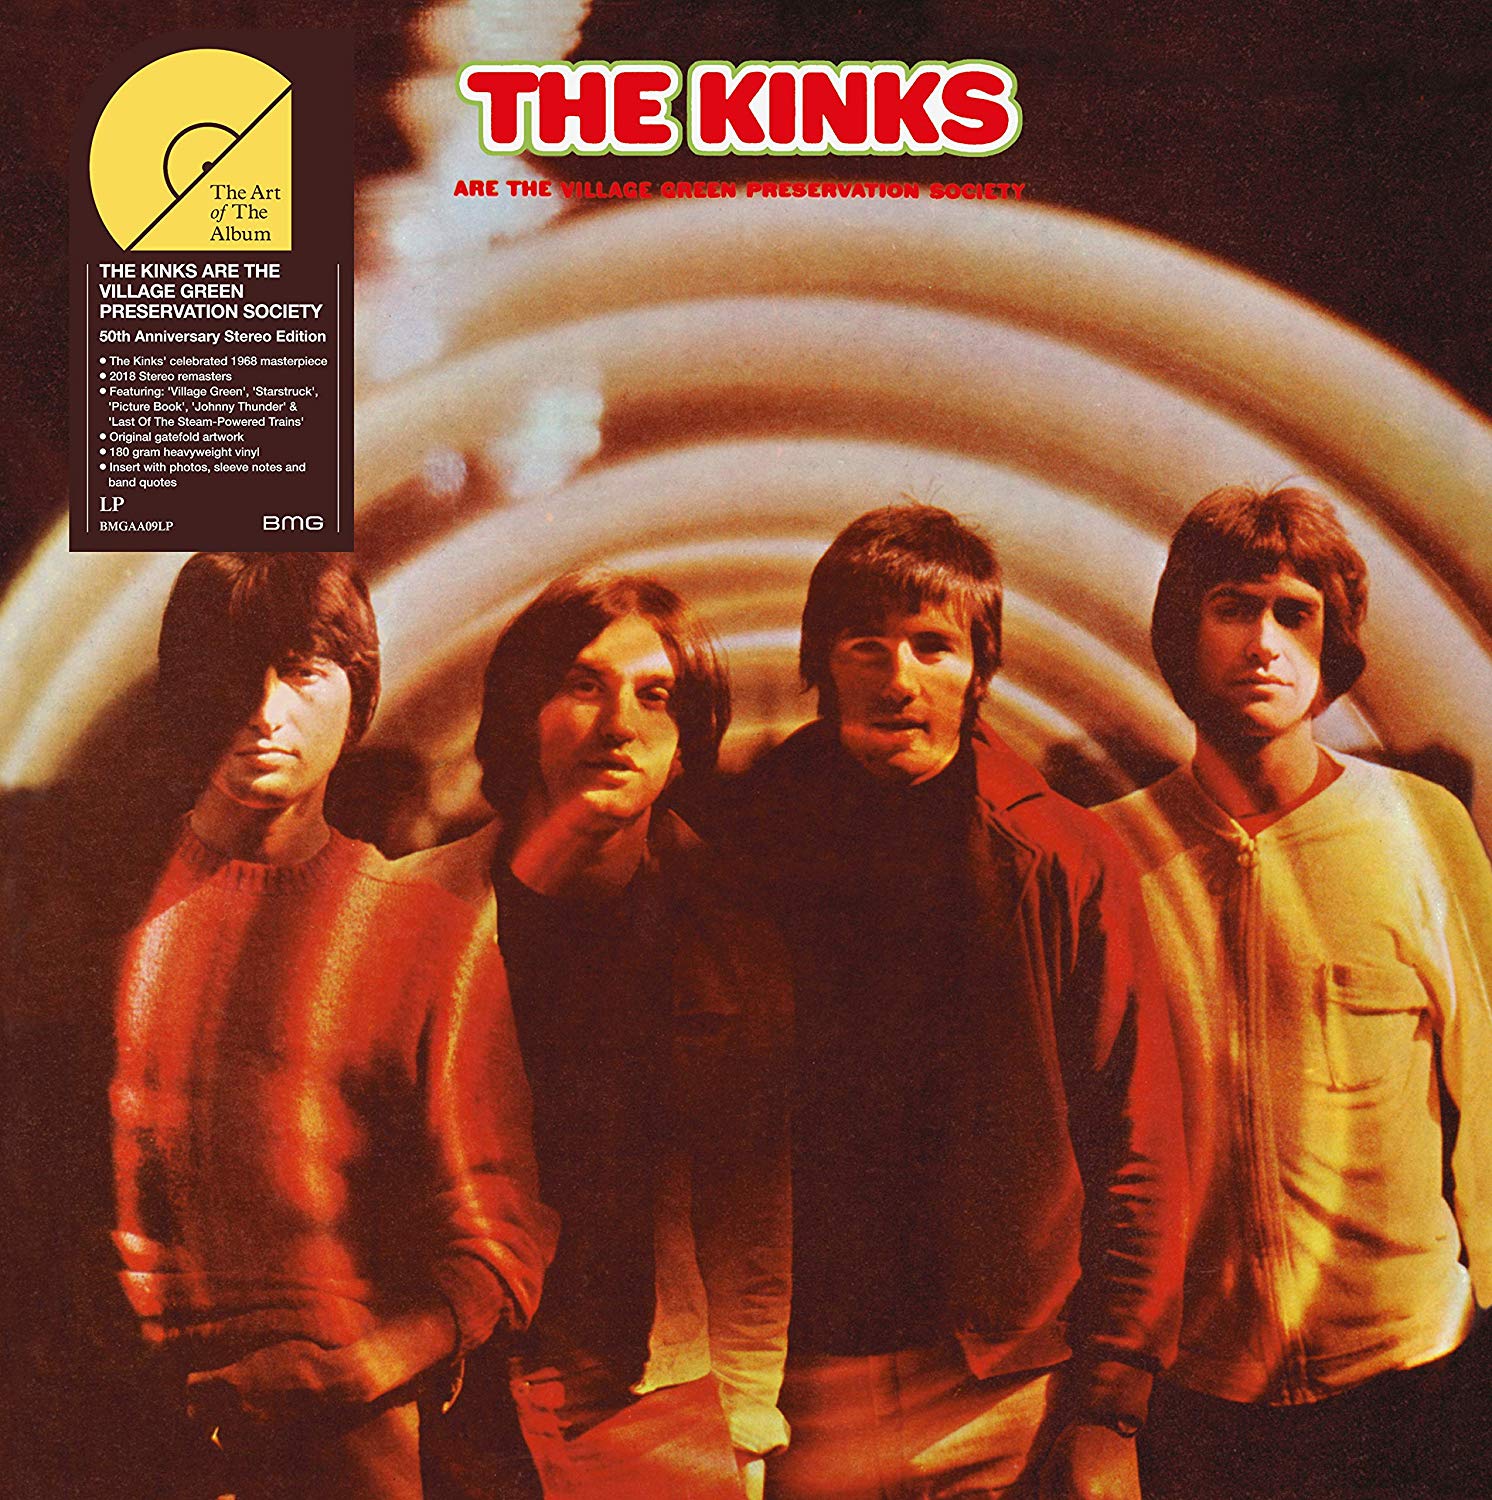 THE KINKS ARE THE VILLAGE GREEN PRESERVATION SOCIETY